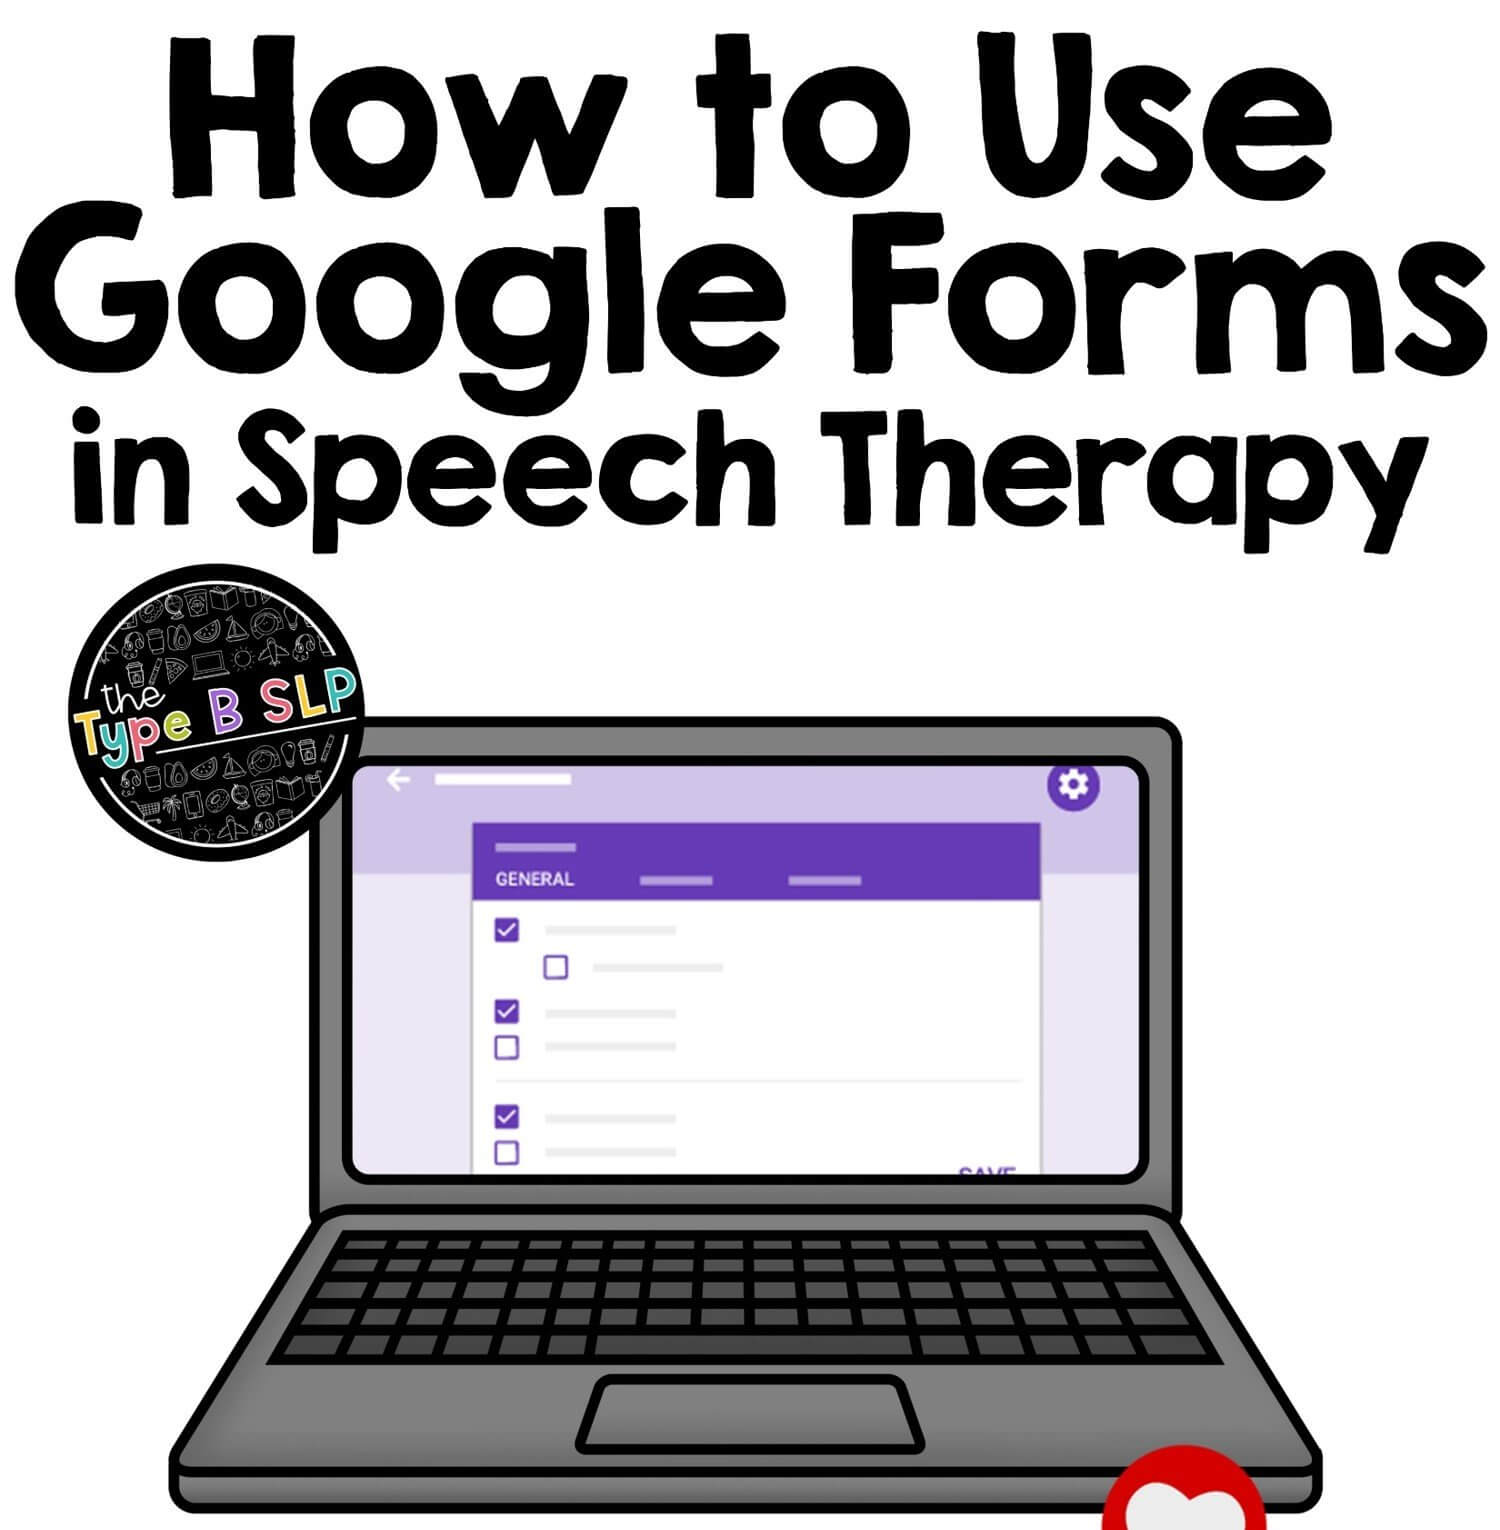 Using Google Forms in Speech Therapy